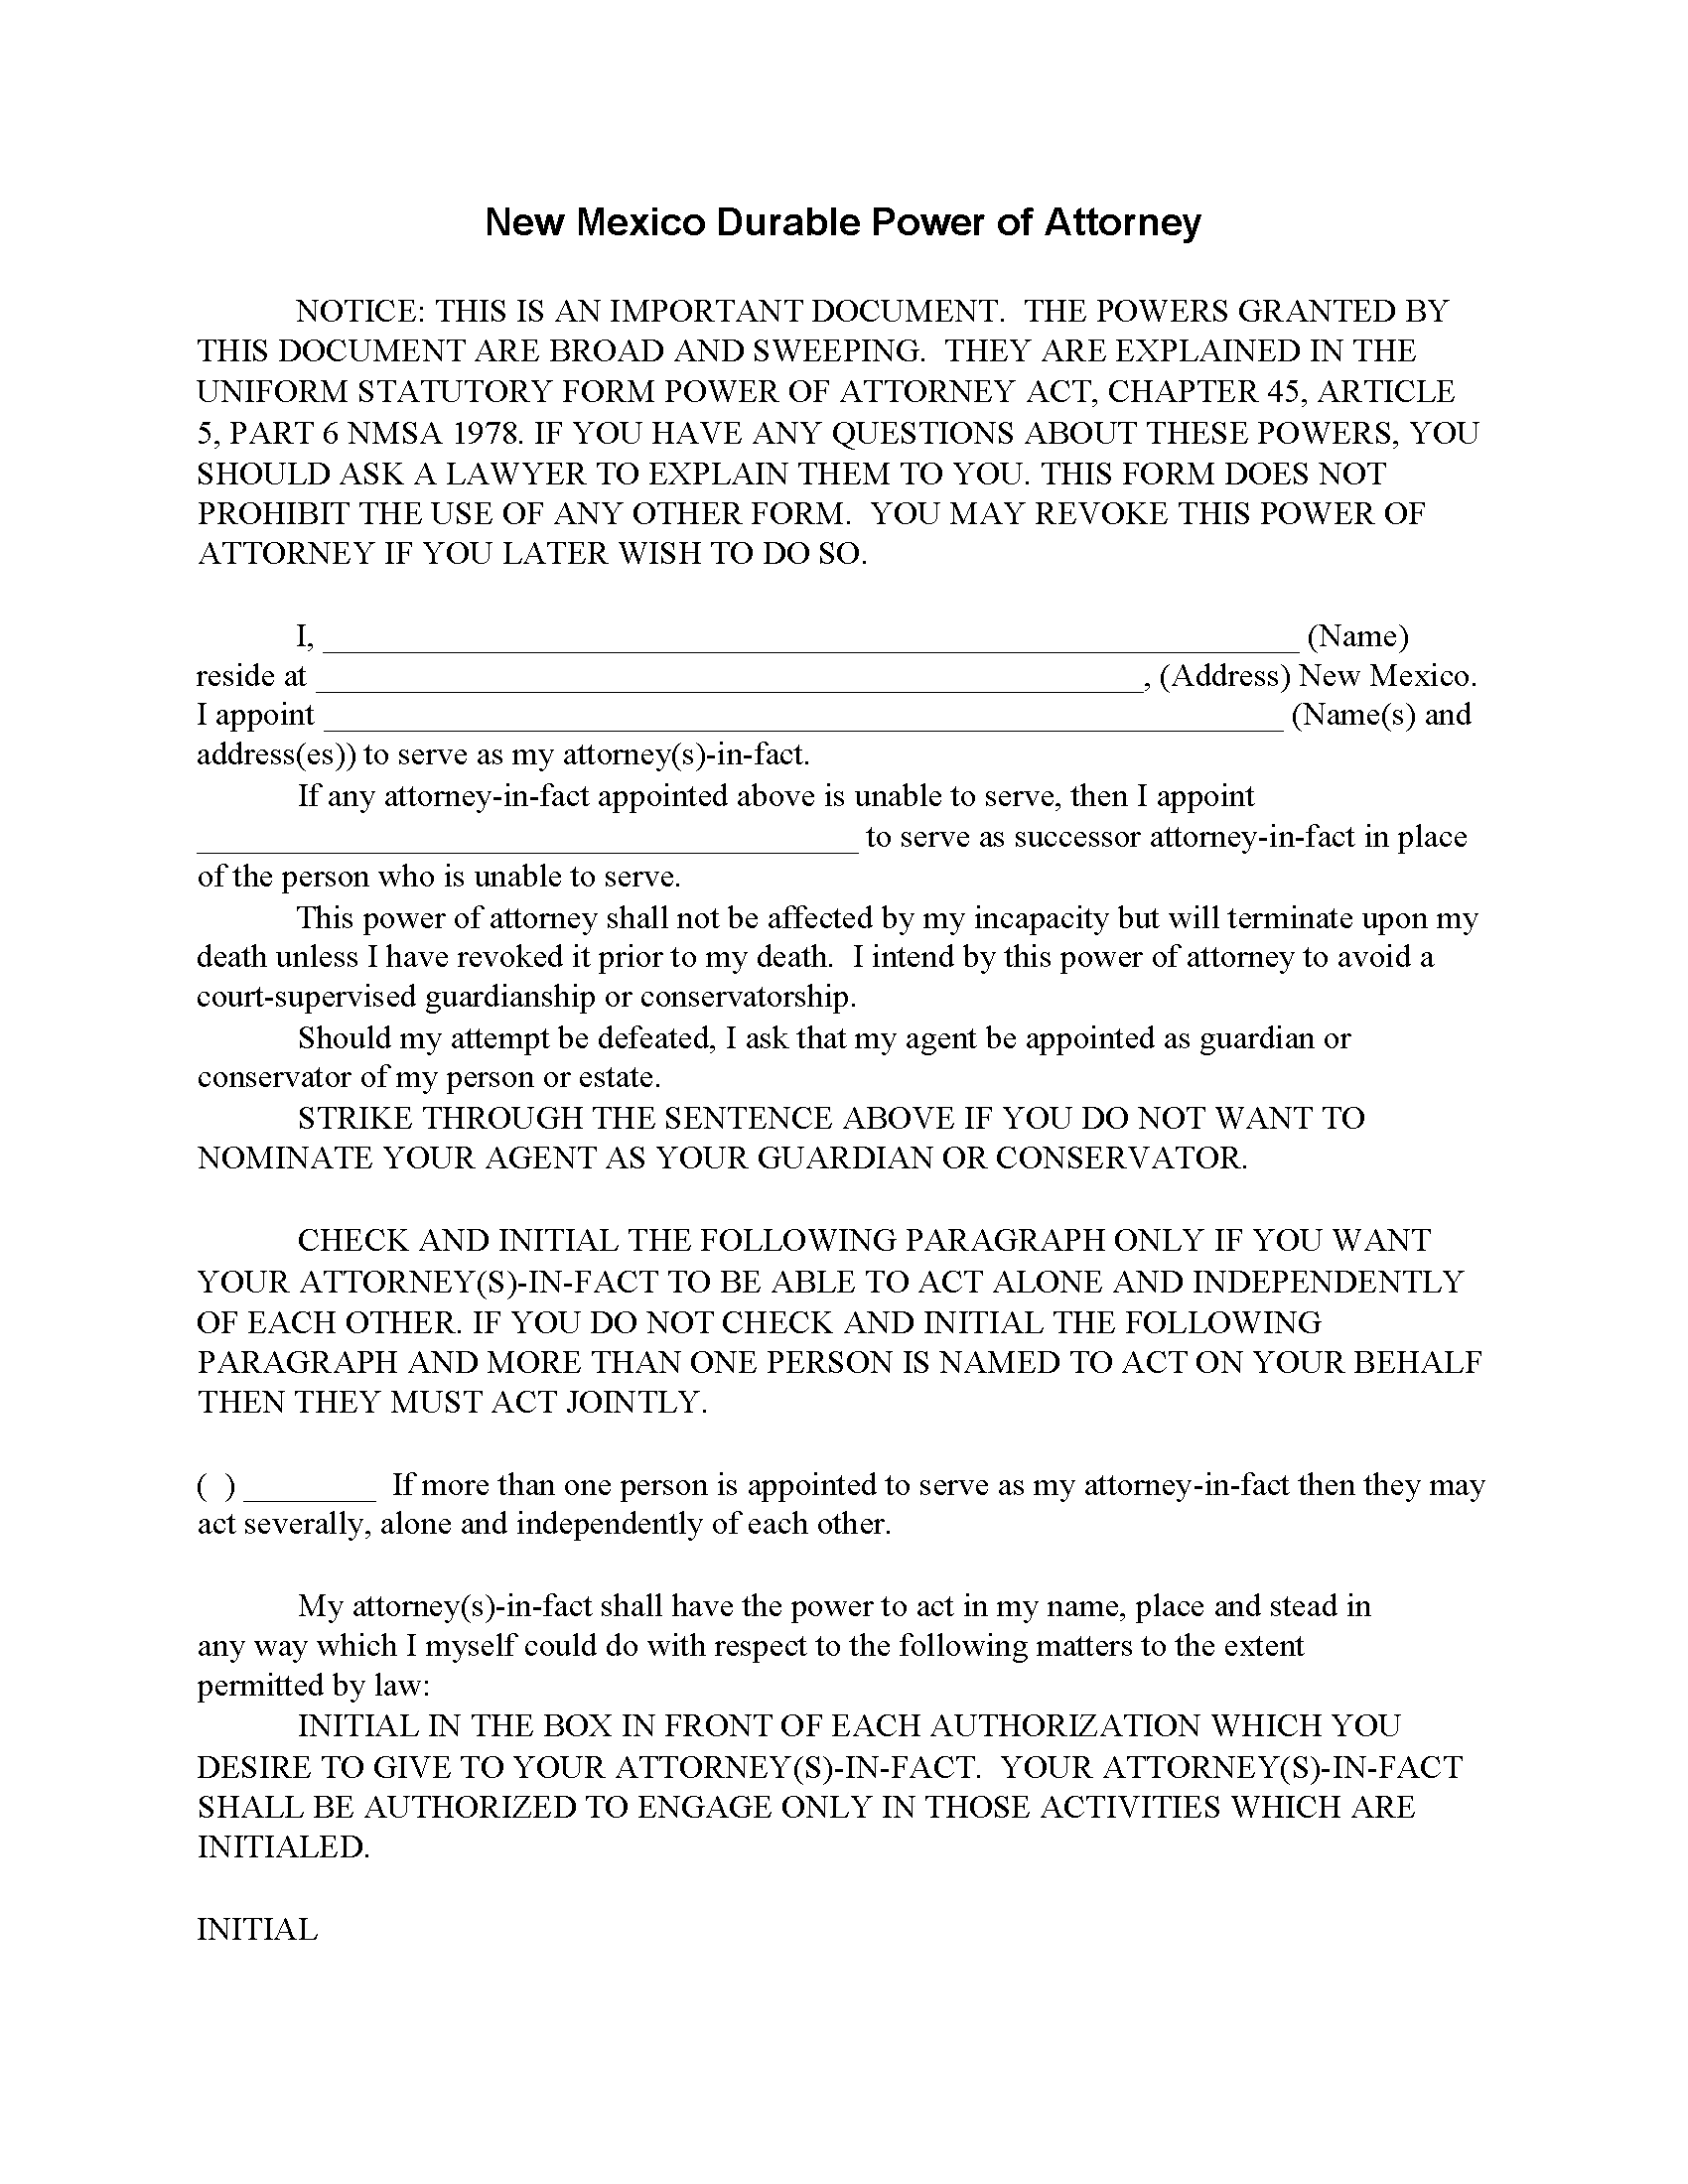 New Mexico Durable Power Of Attorney Form Fillable Pdf Free